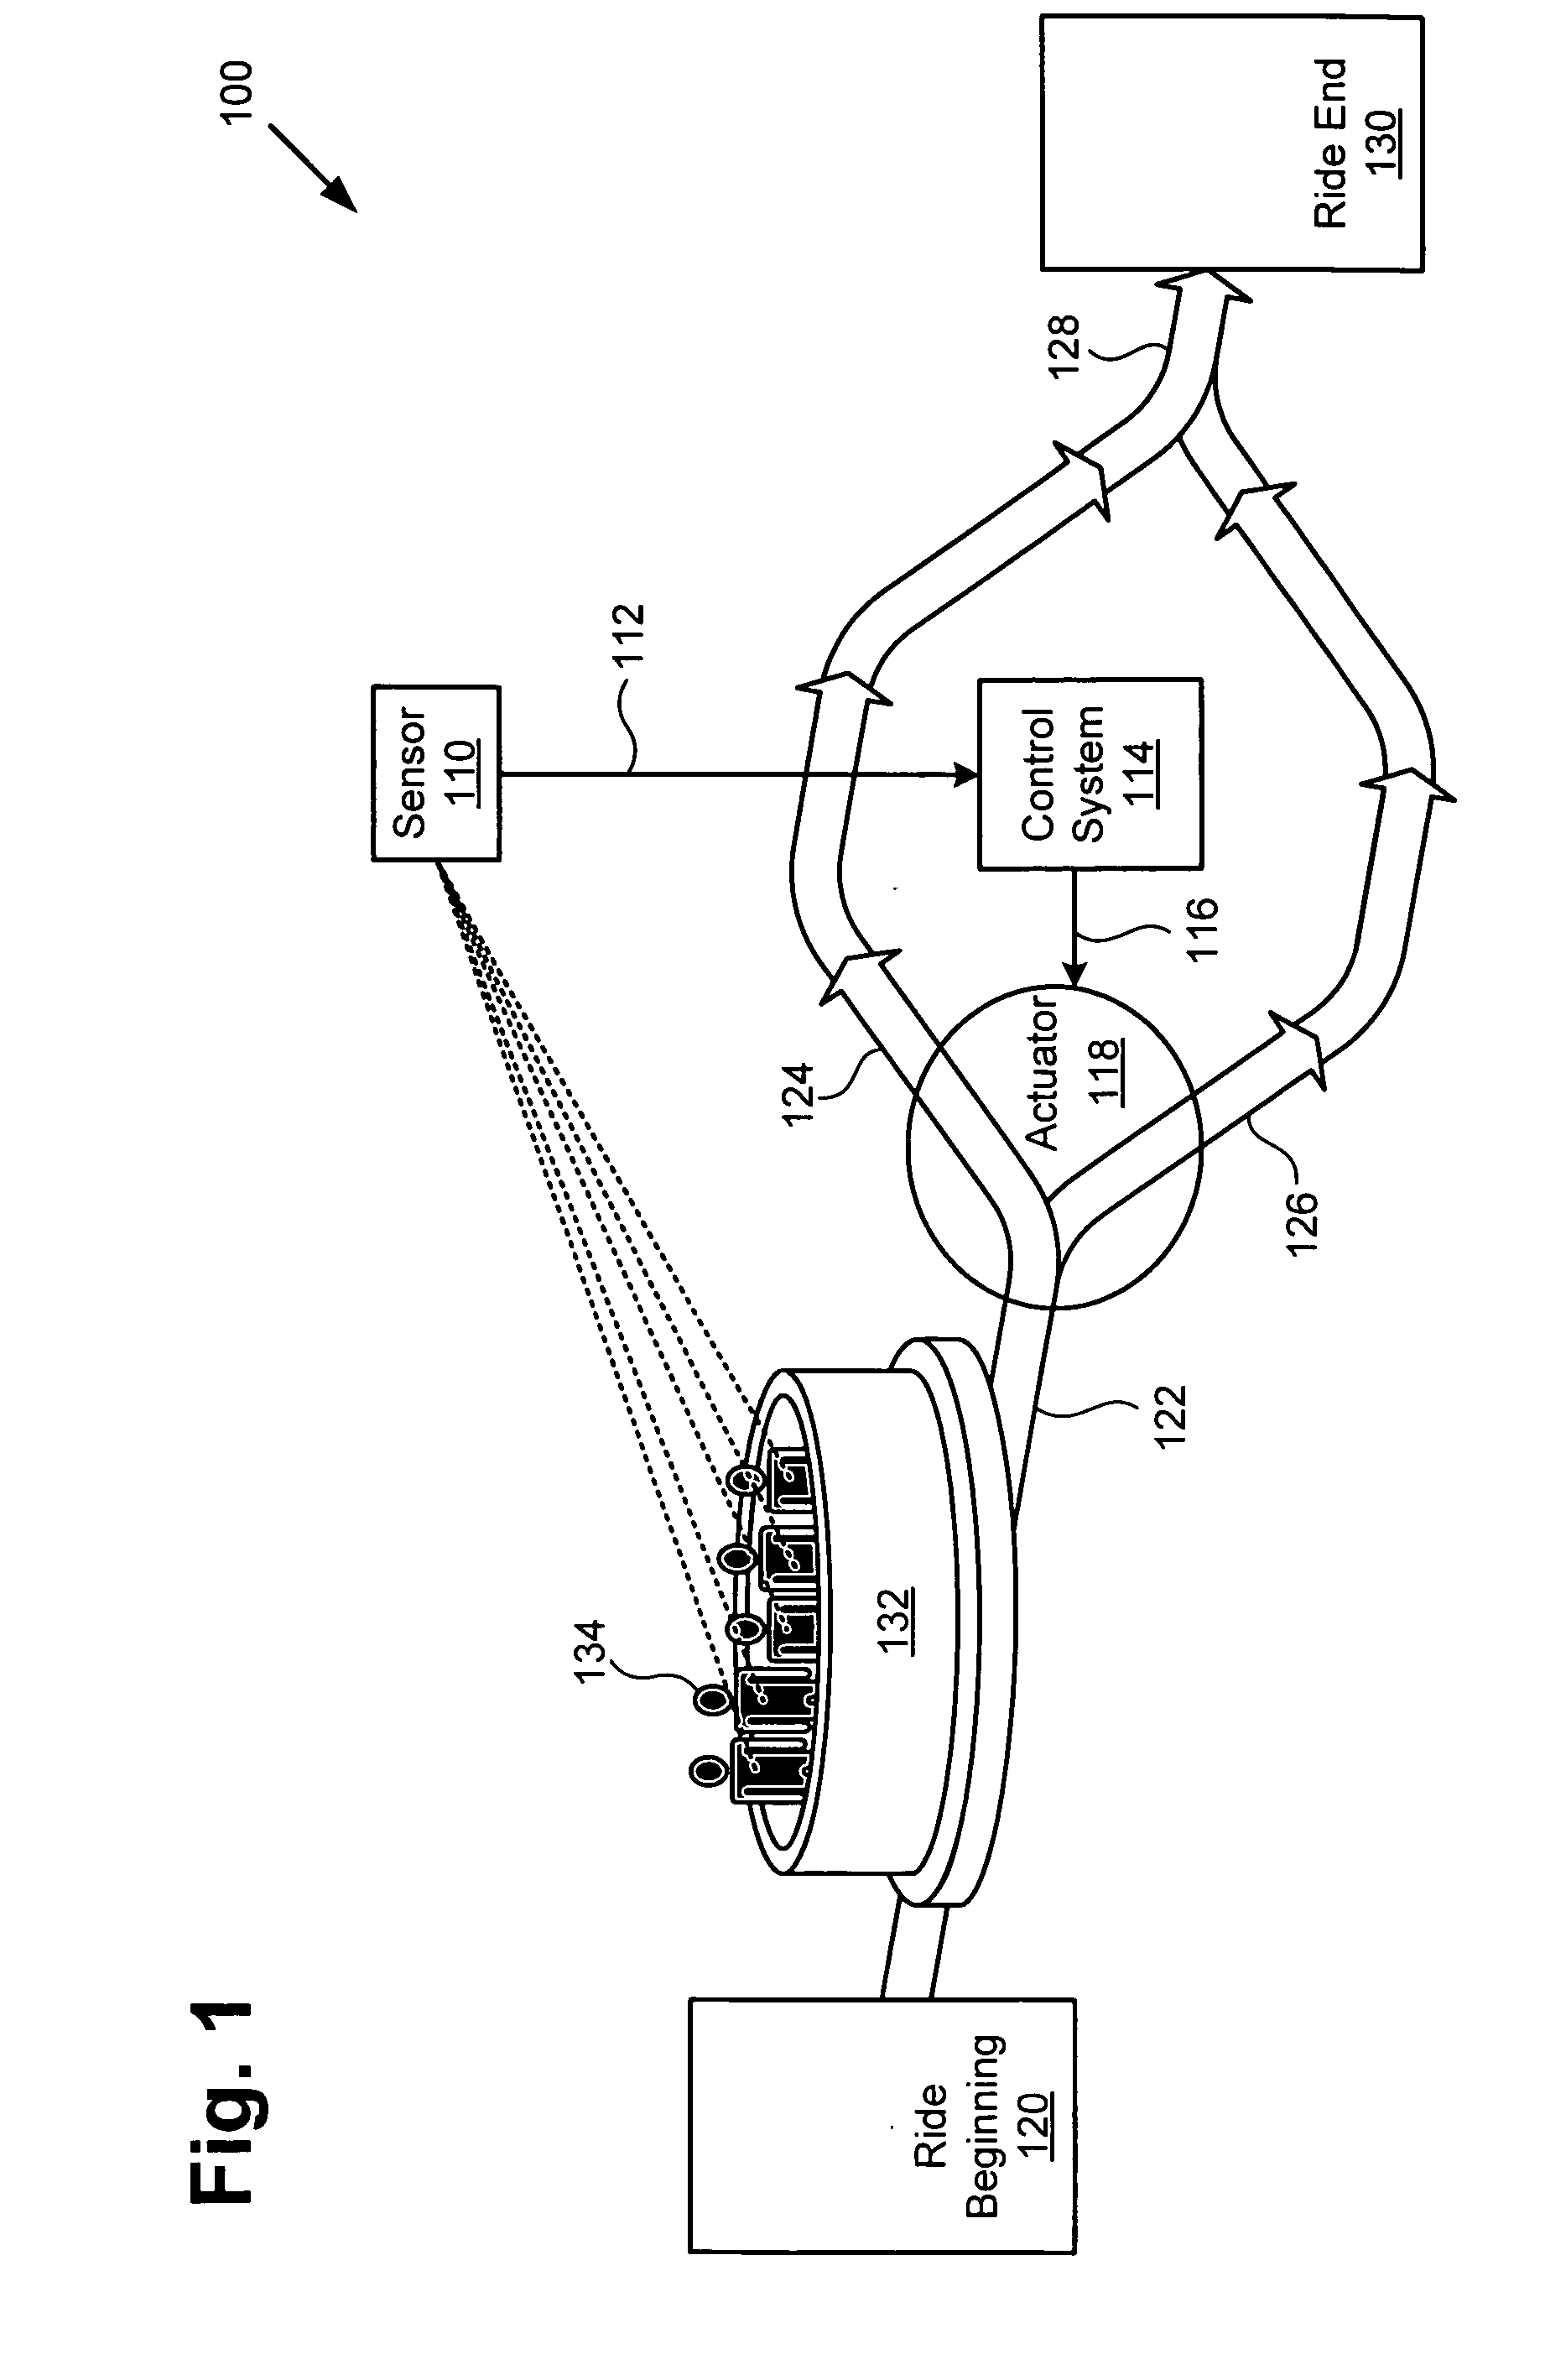 Method and system for providing interactivity based on sensor measurements